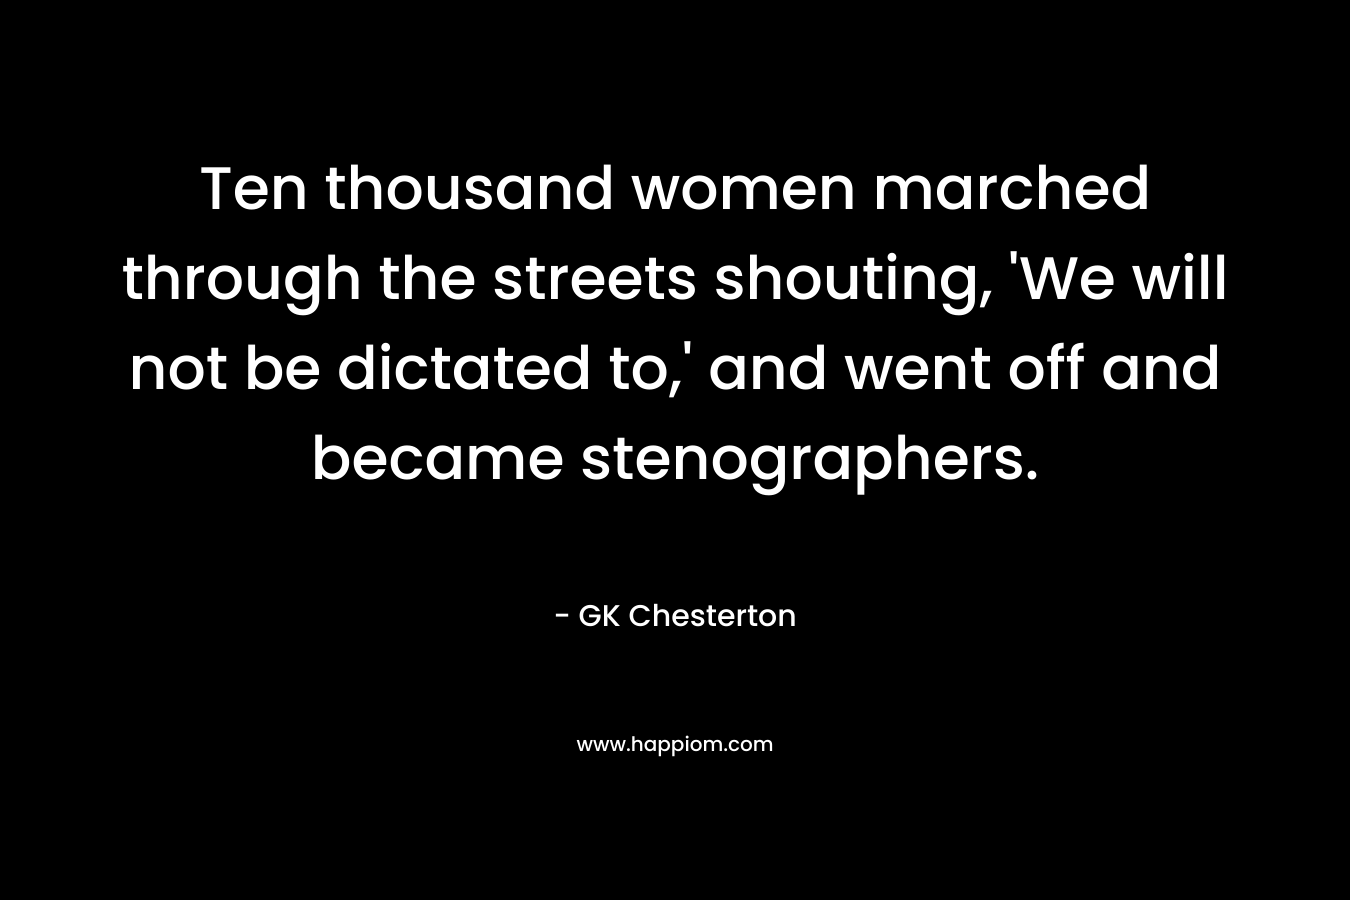 Ten thousand women marched through the streets shouting, 'We will not be dictated to,' and went off and became stenographers.